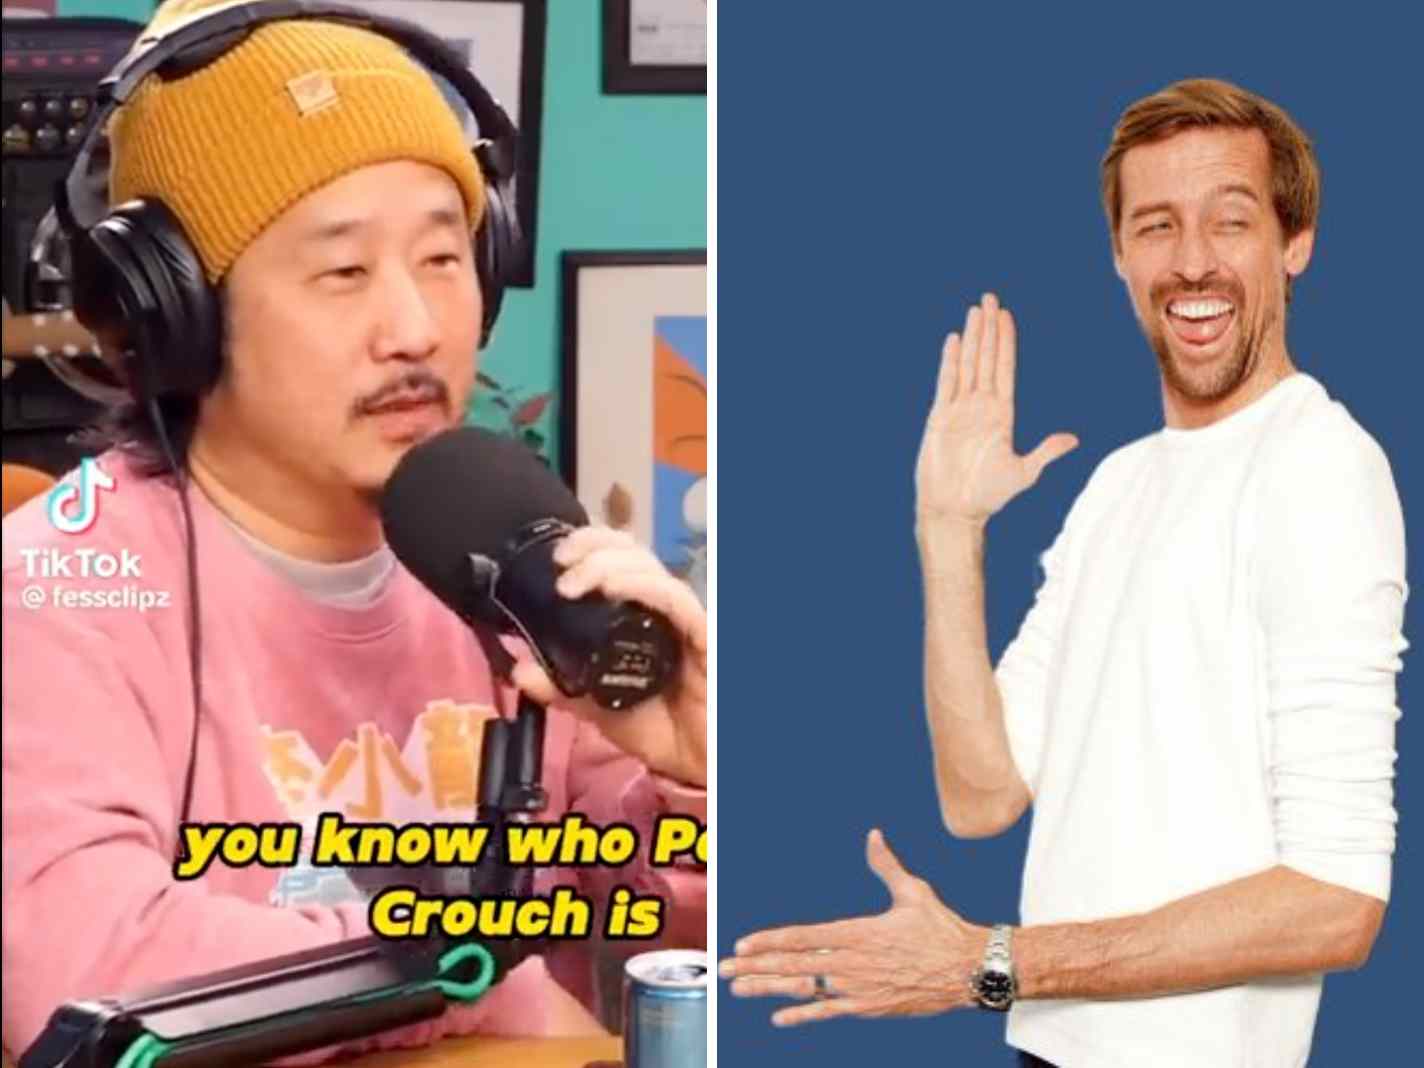 Standup Comedian Bobby Lee Discusses Peter Crouch’s Height in Unlikely Crossover